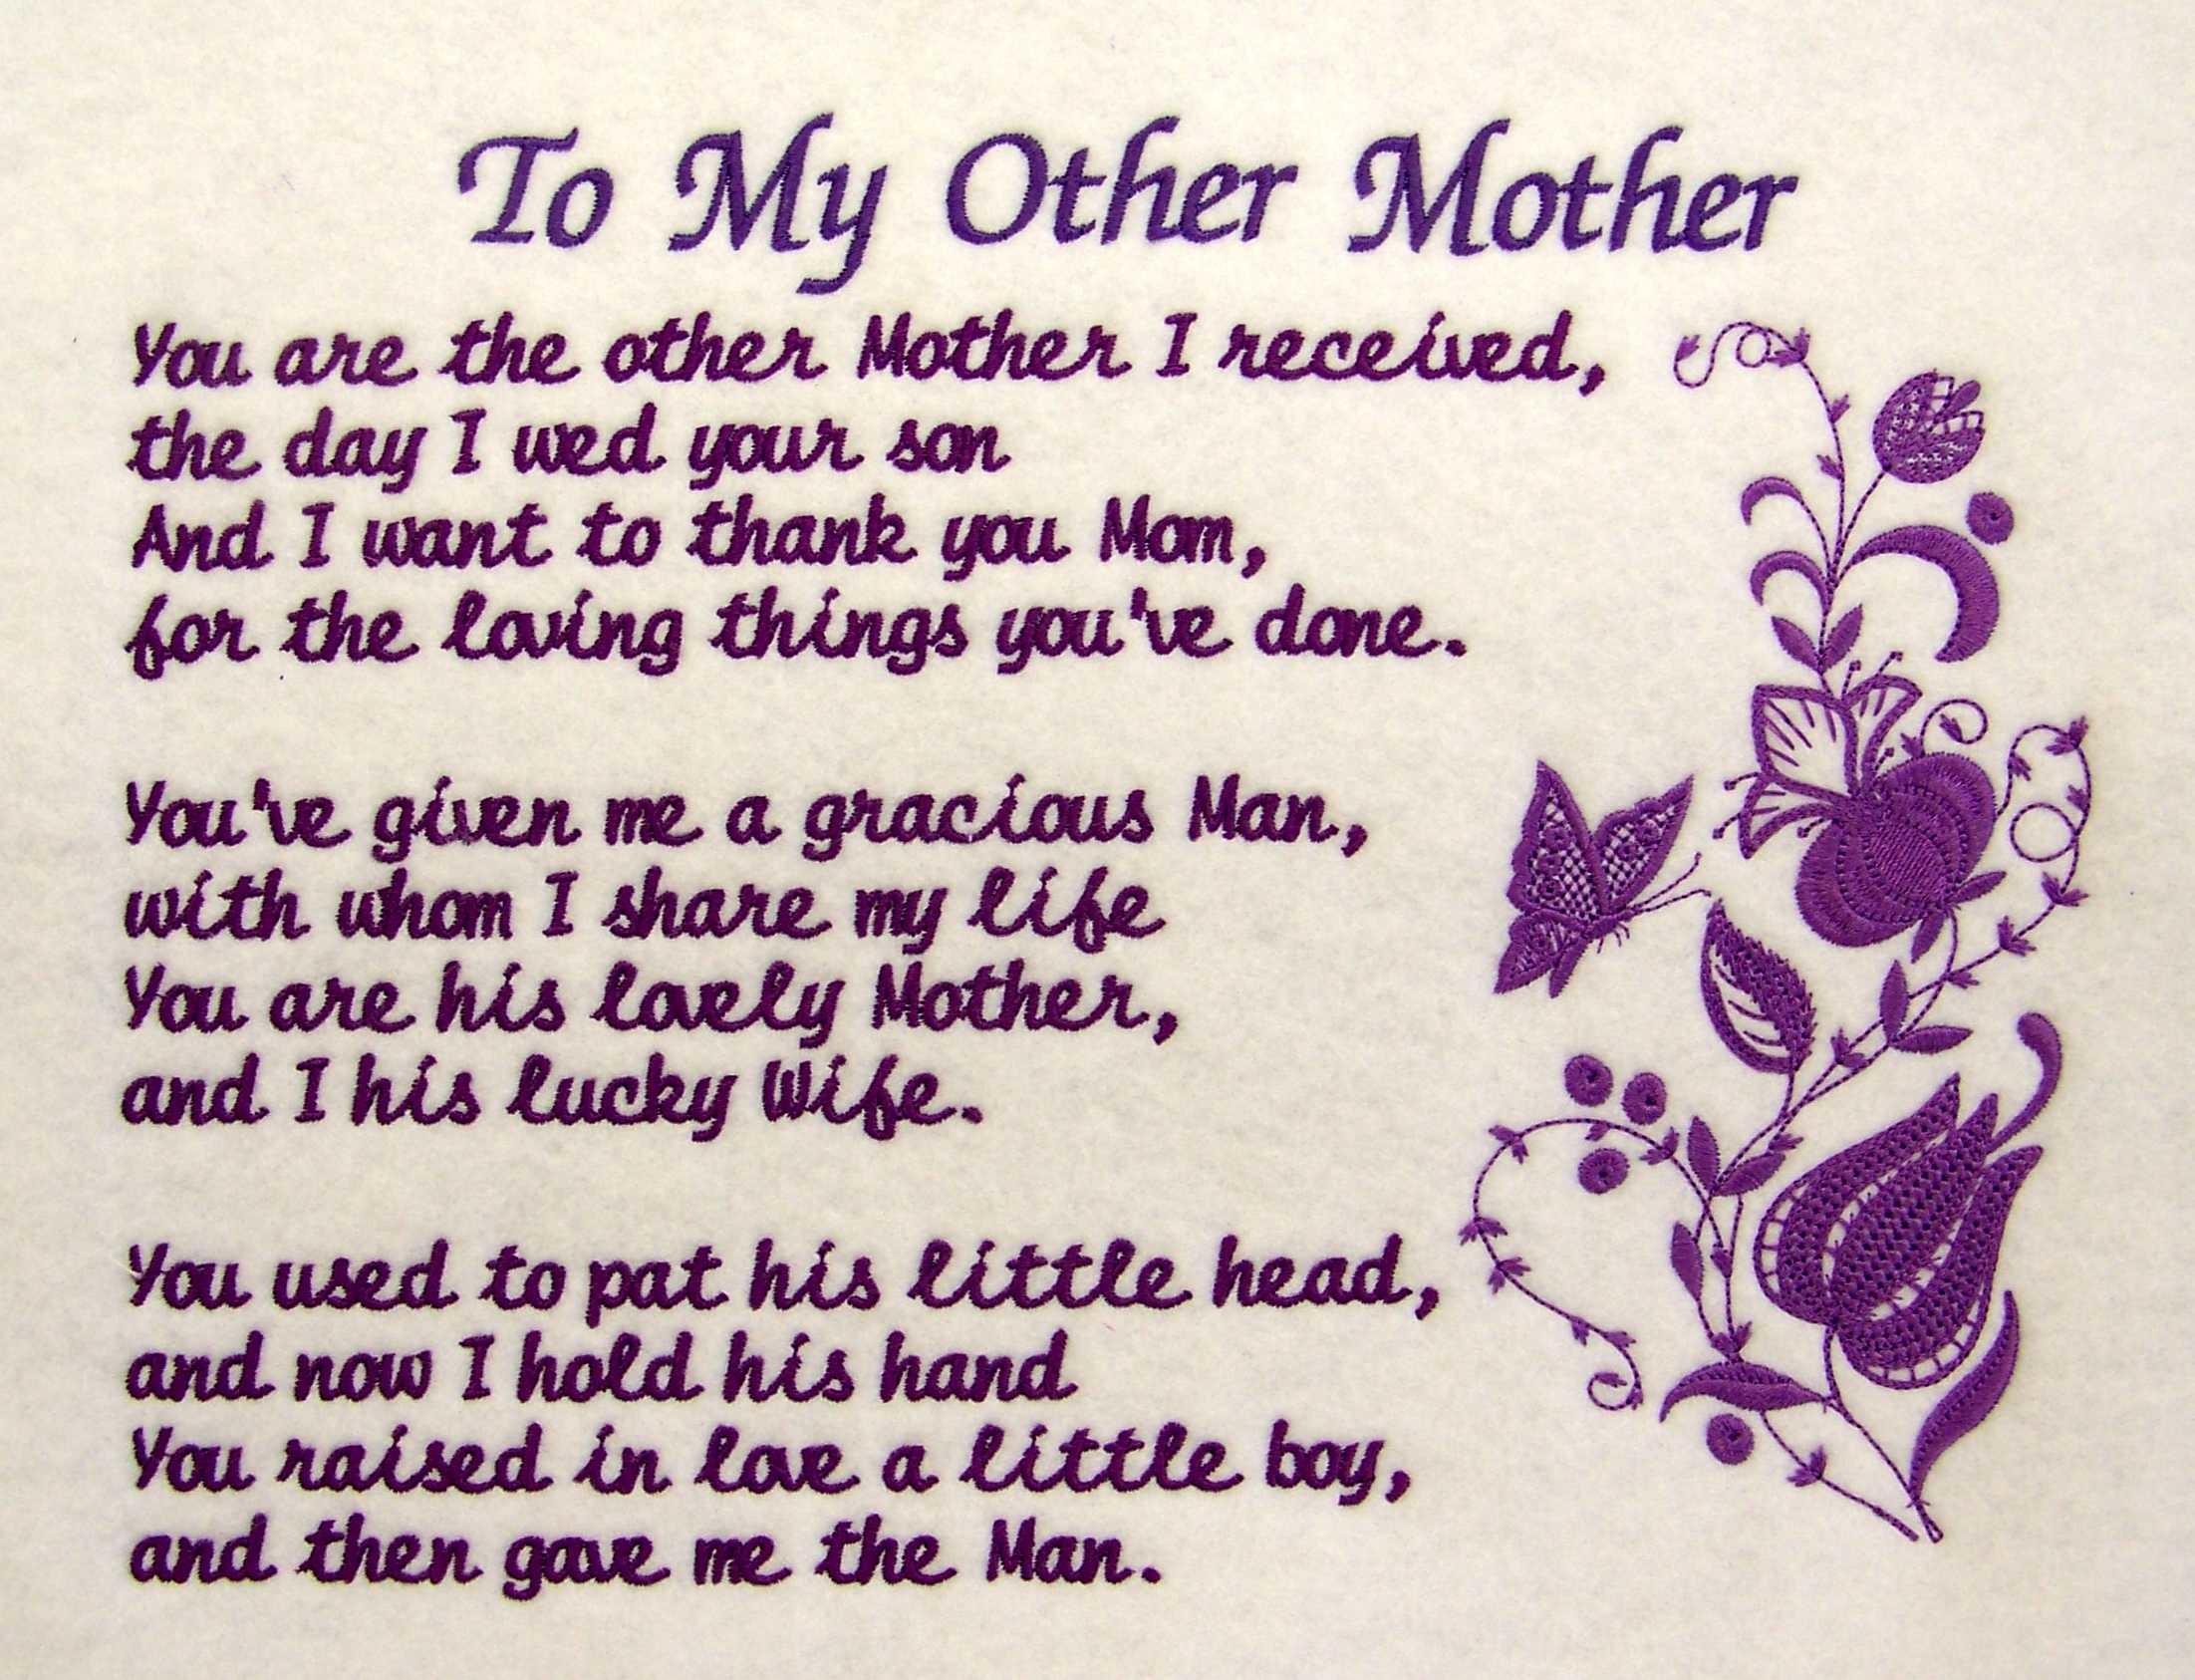 2203x1686 To My Other Mother mothers day happy mothers day happy mothers day pictures  mothers day quotes happy mothers day quotes mothers day quote mother's day